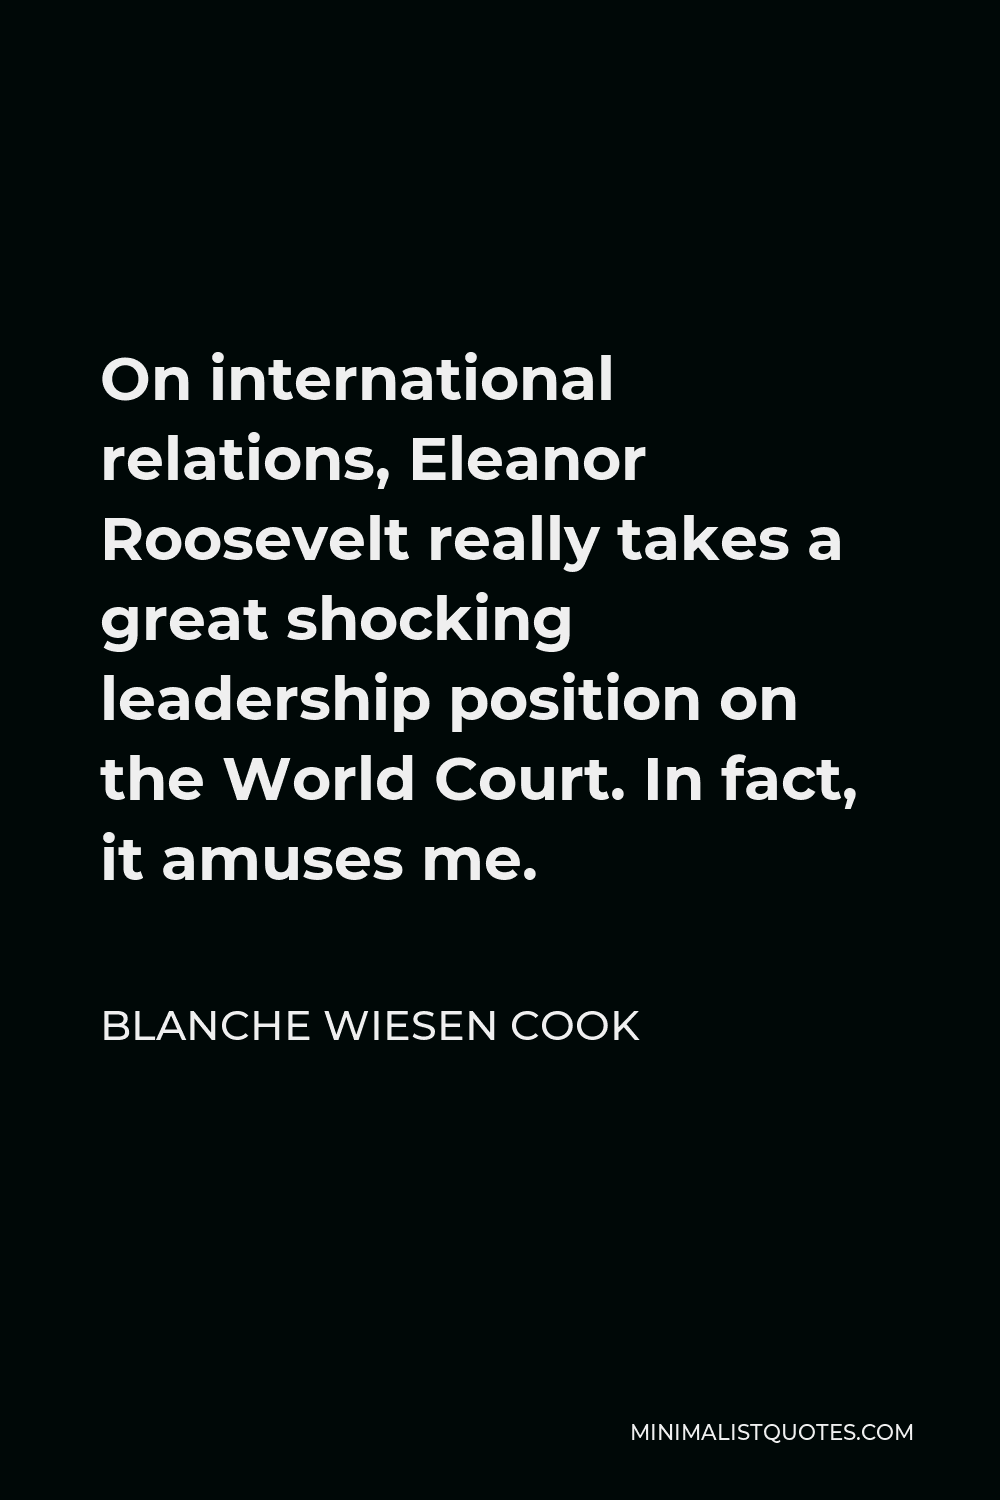 Blanche Wiesen Cook Quote - On international relations, Eleanor Roosevelt really takes a great shocking leadership position on the World Court. In fact, it amuses me.